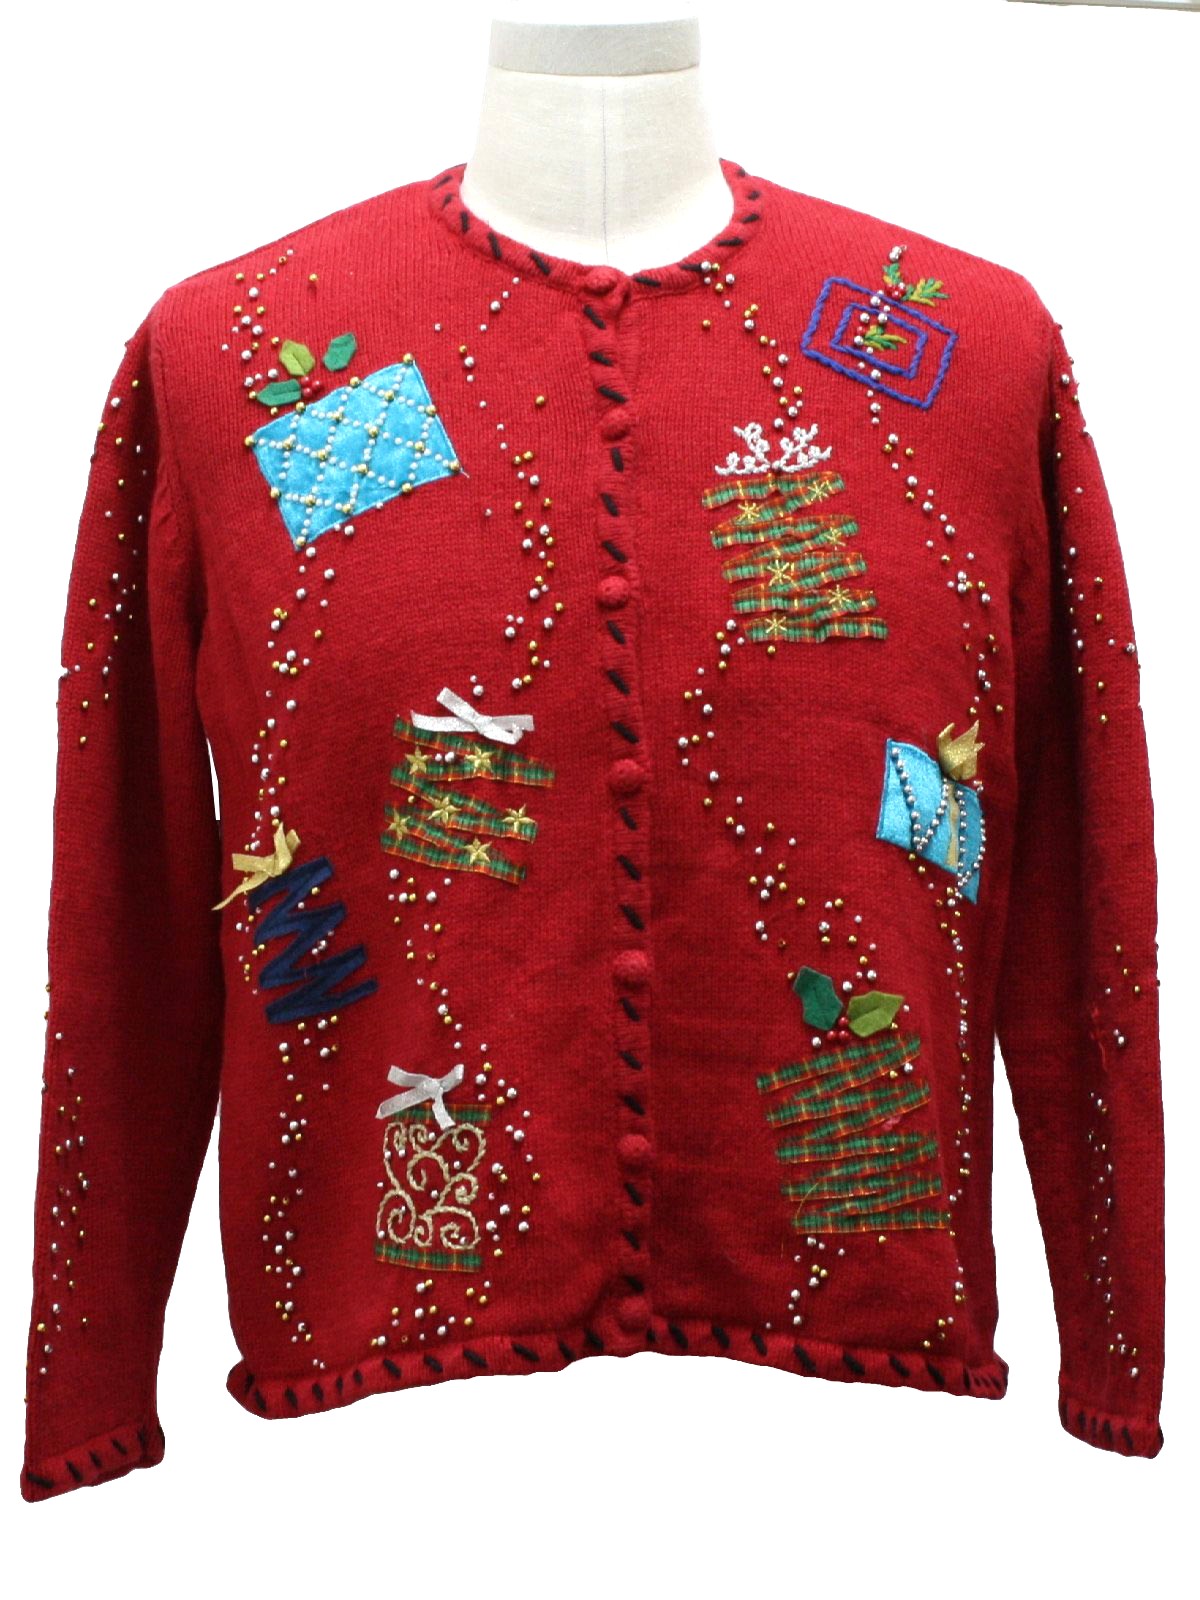 Womens Ugly Christmas Sweater: -Studio- Womens red background ramie ...